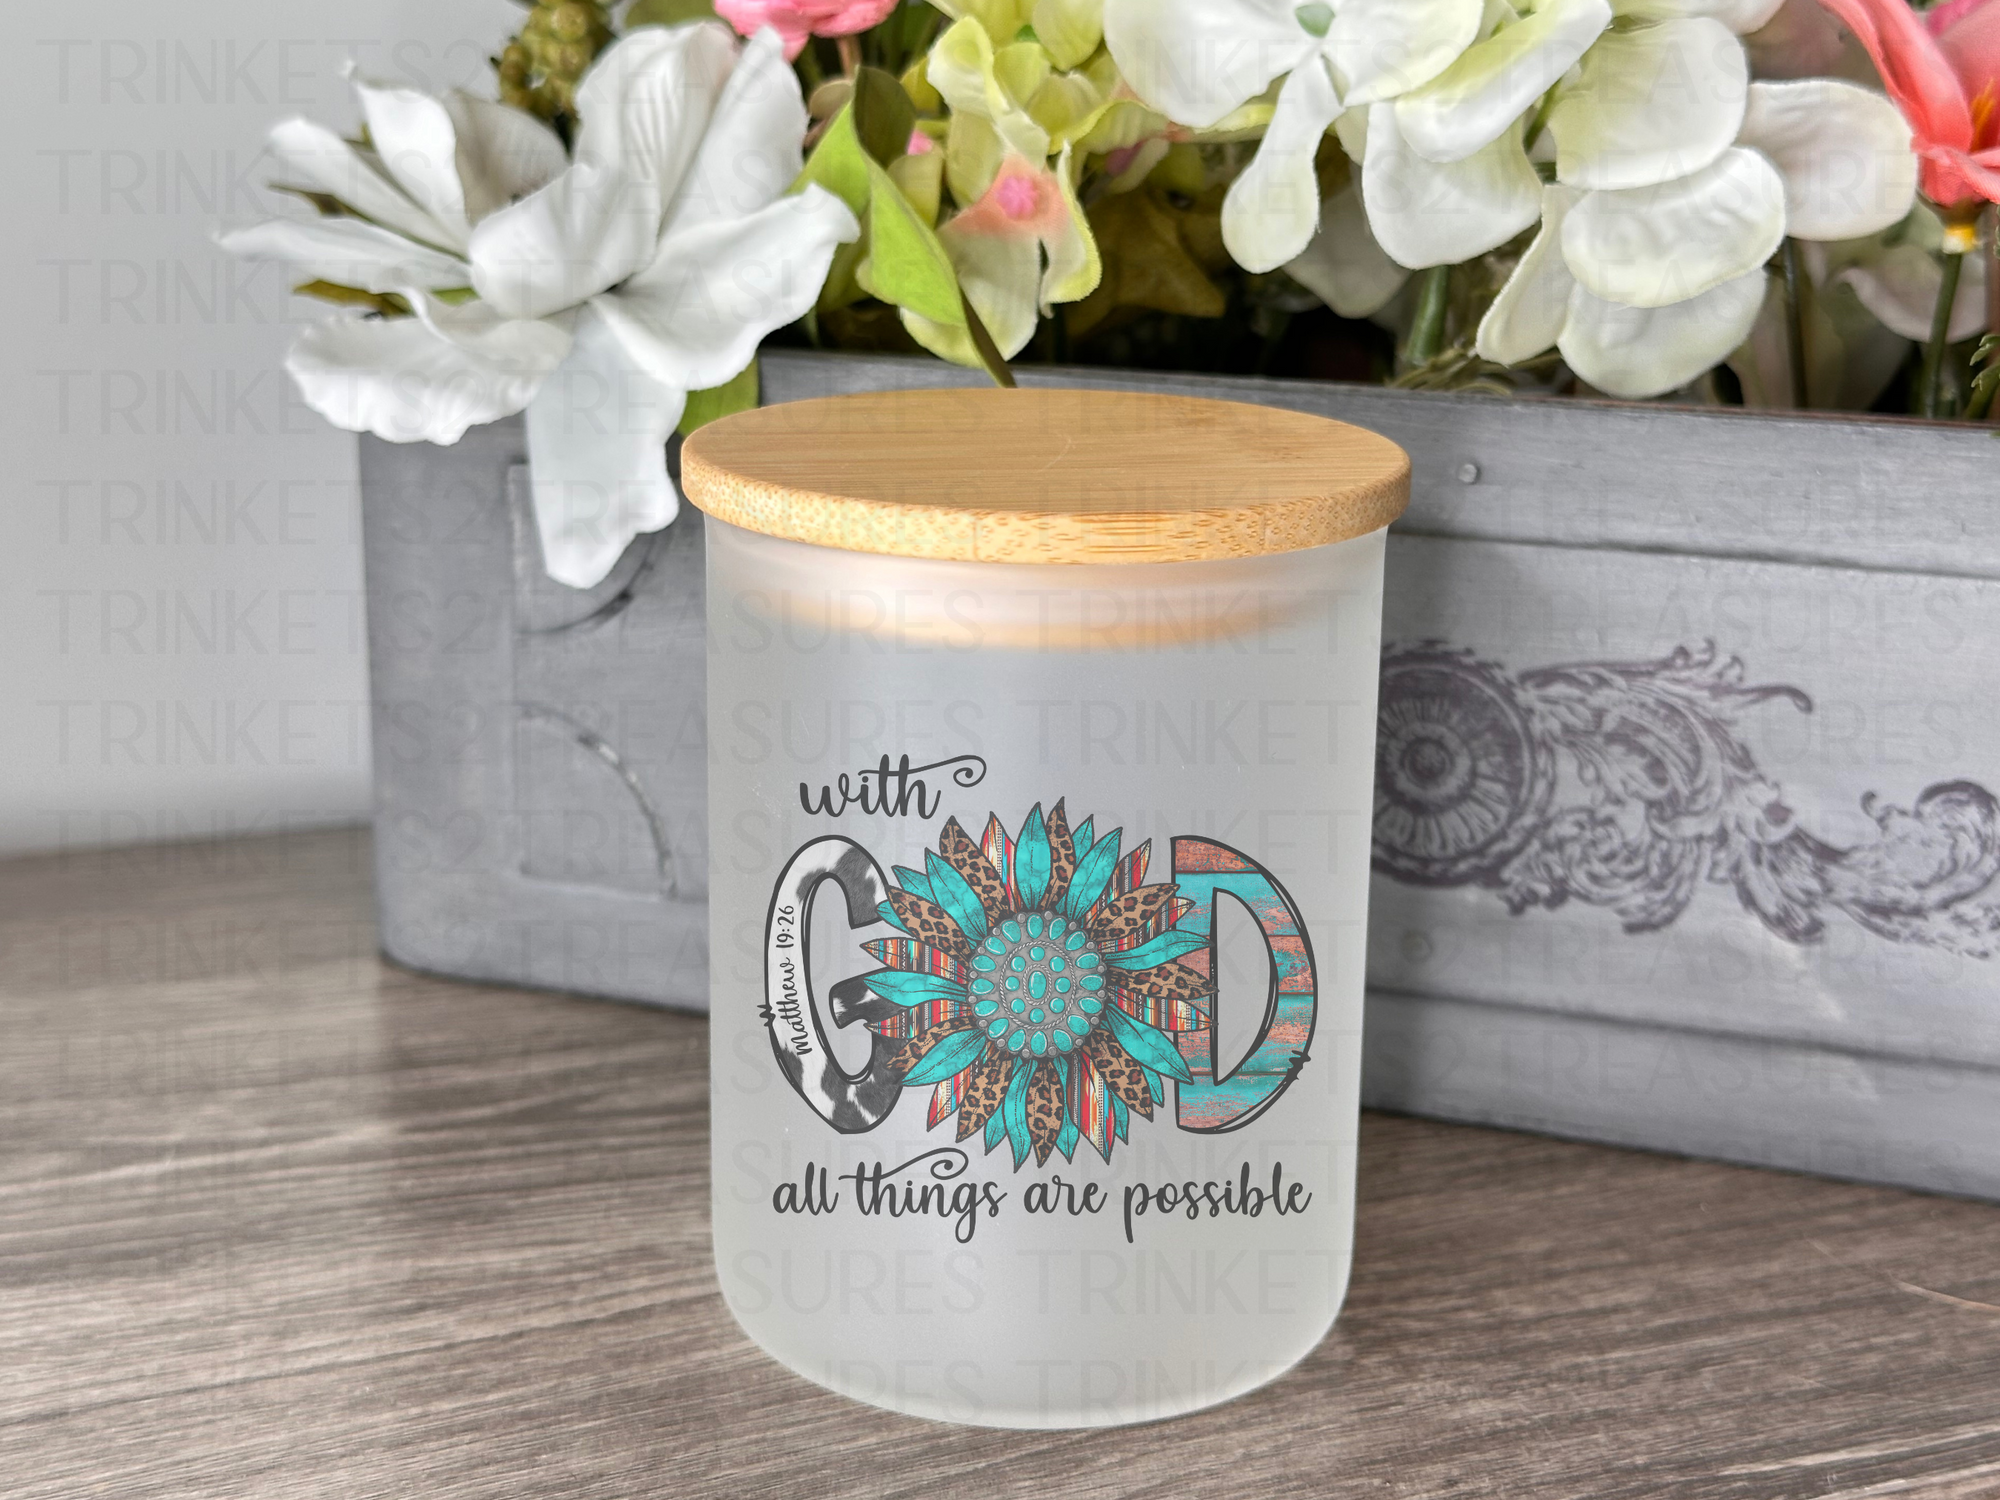 10 oz Frosted Candle Jars with Bamboo Lid/Multi-Purpose Jar/With God All Things are Possible/#502